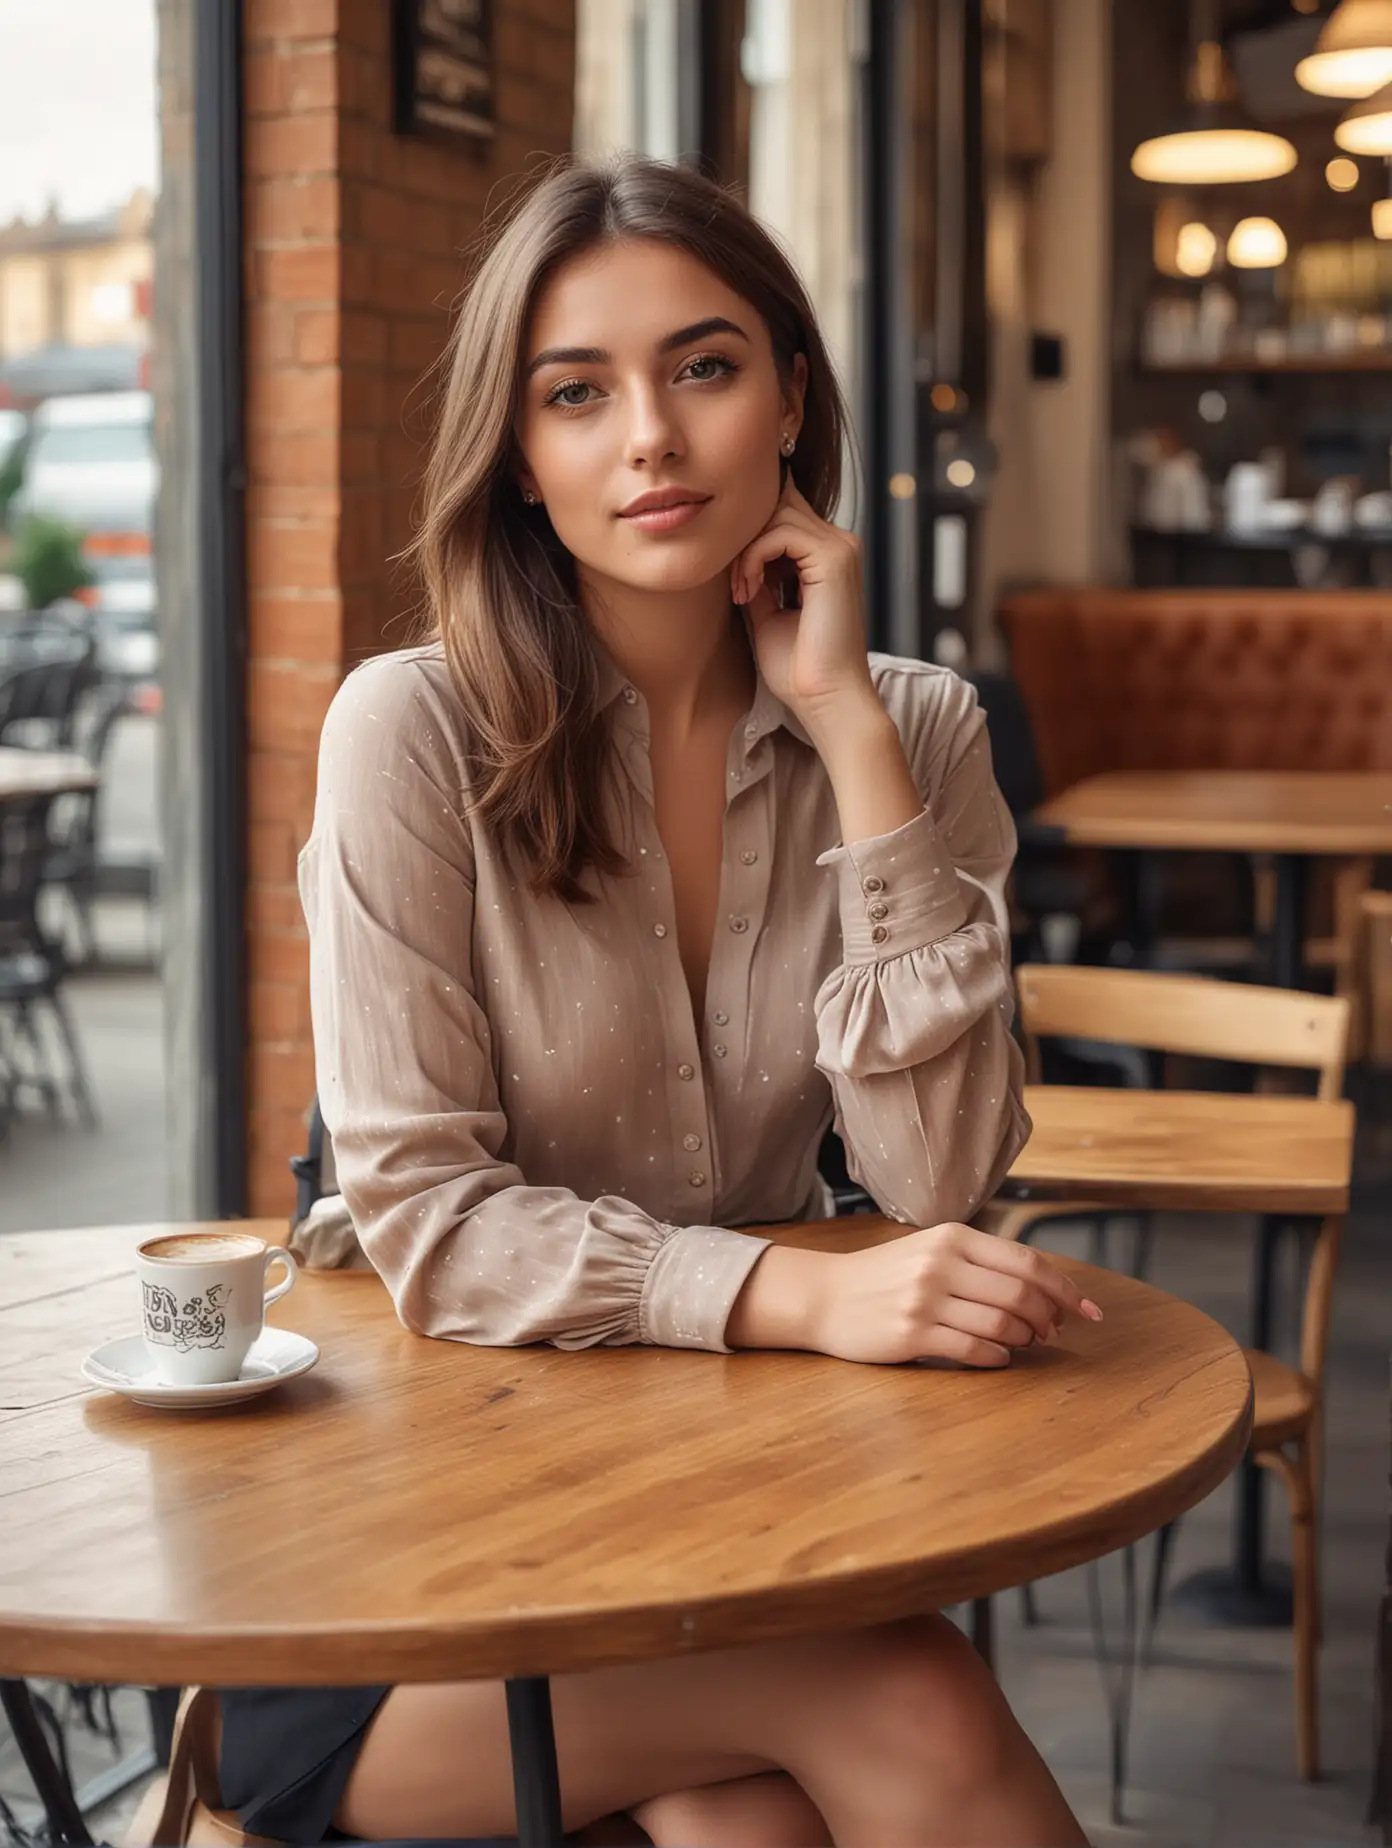 British ，girl, fashionable clothes, sitting at the table in cafe background, exquisite facial features, facing the camera, professional photography technique, full body shot